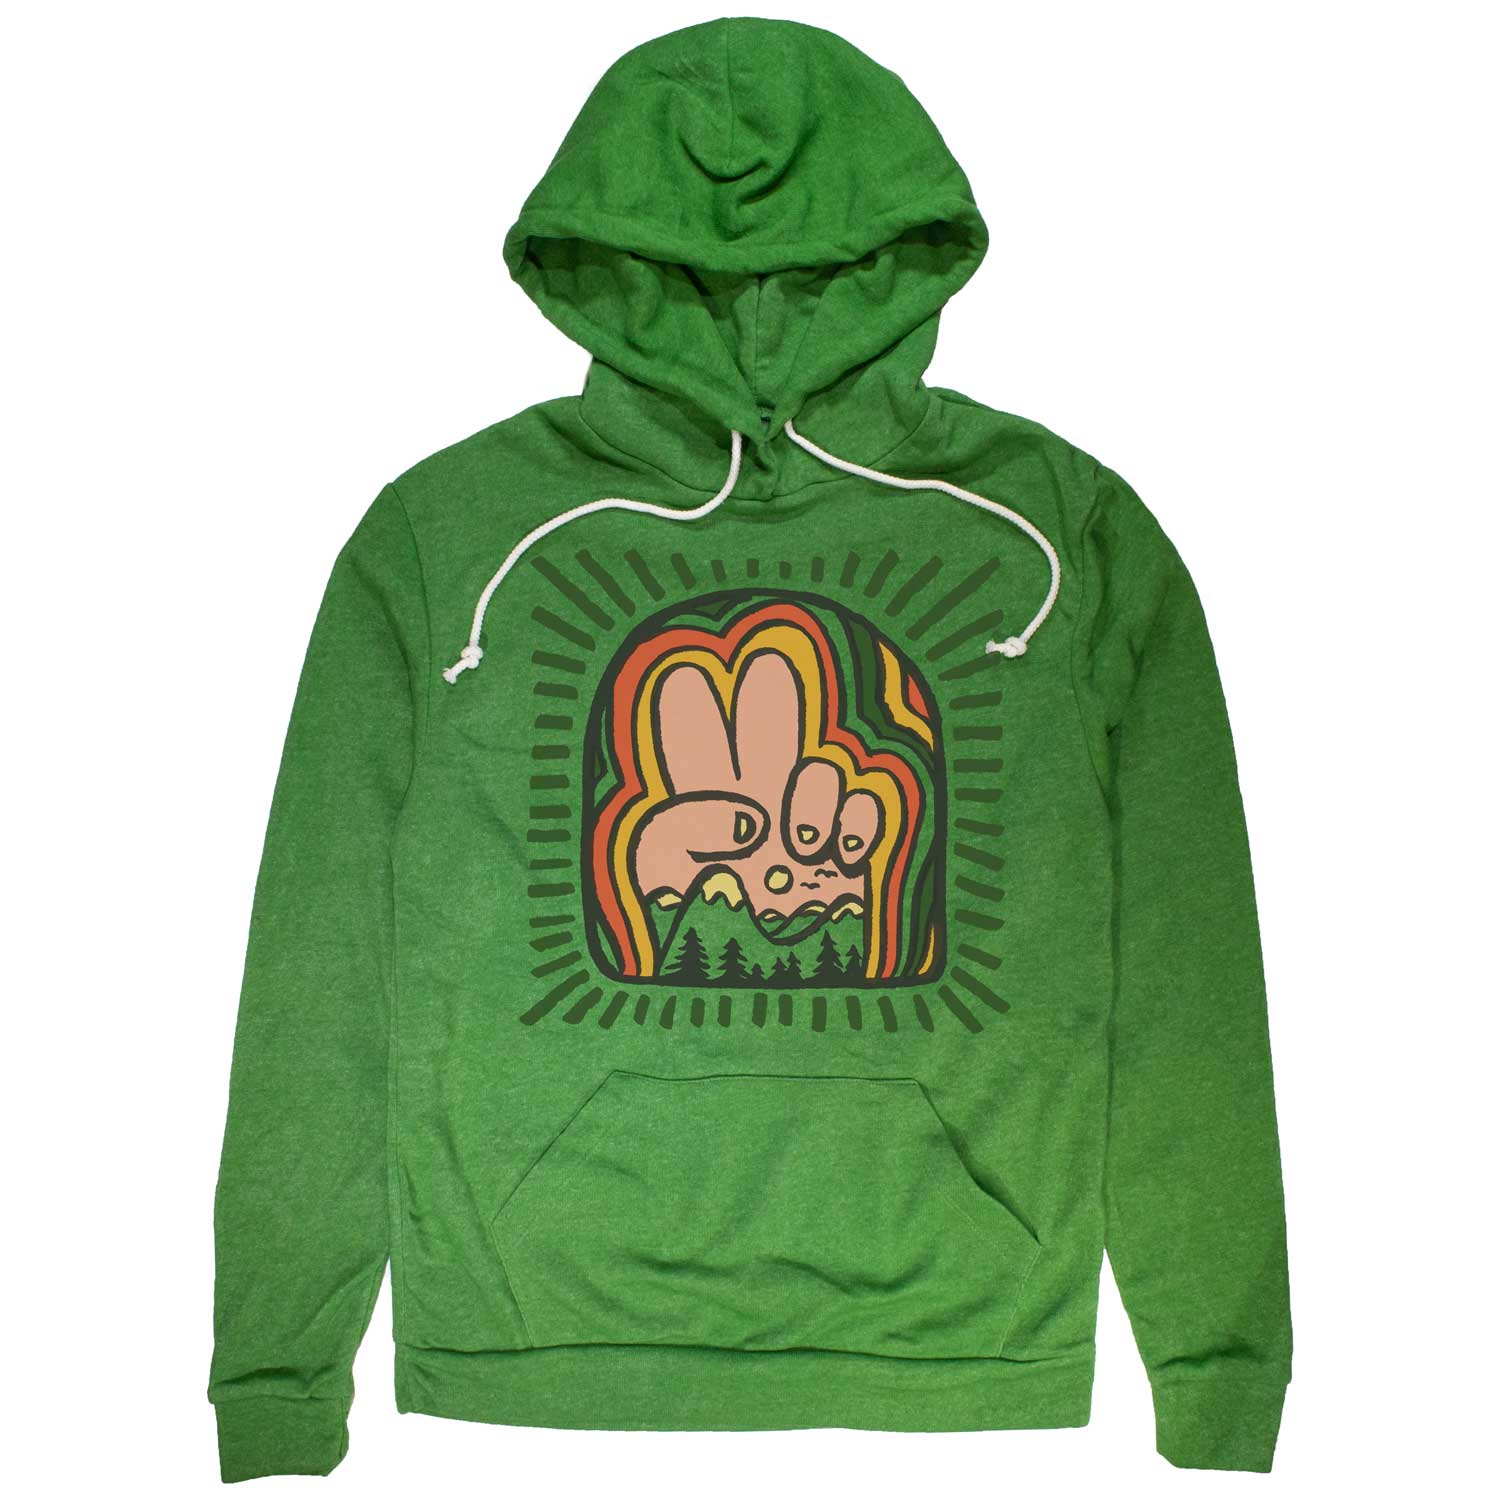 Peace Mountains Vintage Pullover Hoodie | Cool Hippie Vibe Graphic | SOLID THREADS